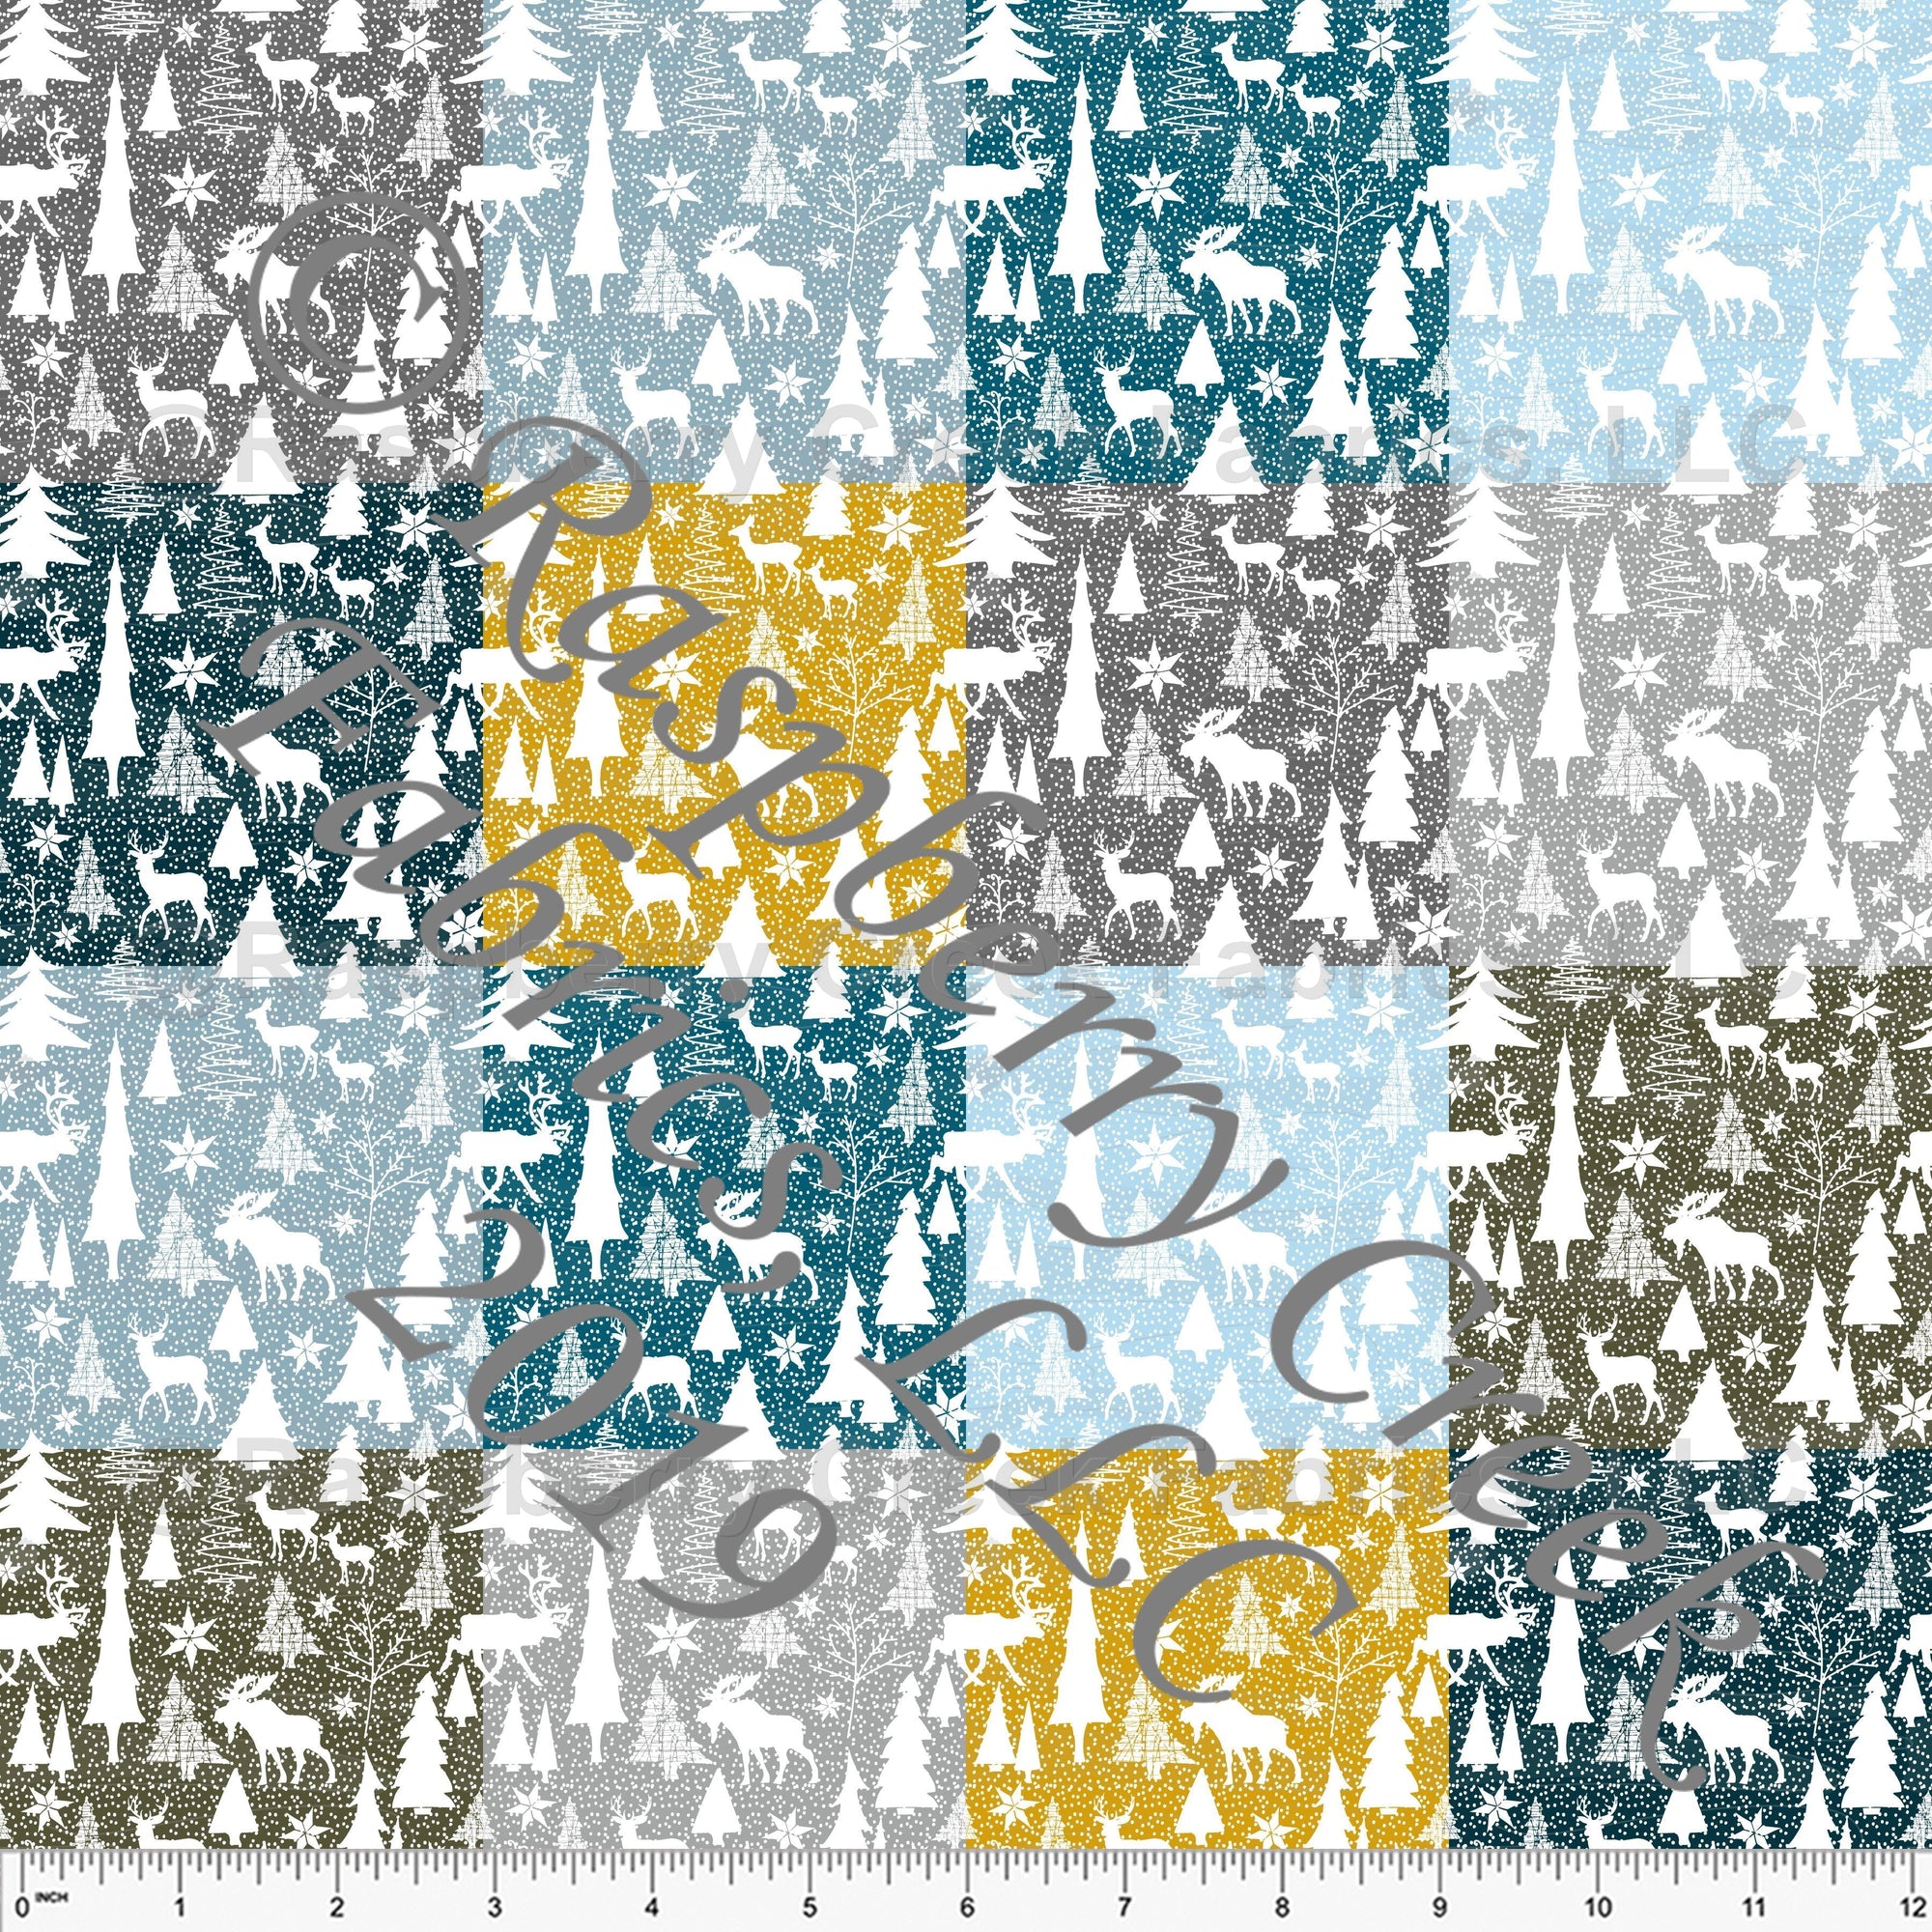 Tonal Grey Blue Teal Green and Mustard Winter Wonderland Patchwork Minky Cuddle Fabric, By Elise Peterson for CLUB Fabrics Fabric, Raspberry Creek Fabrics, watermarked